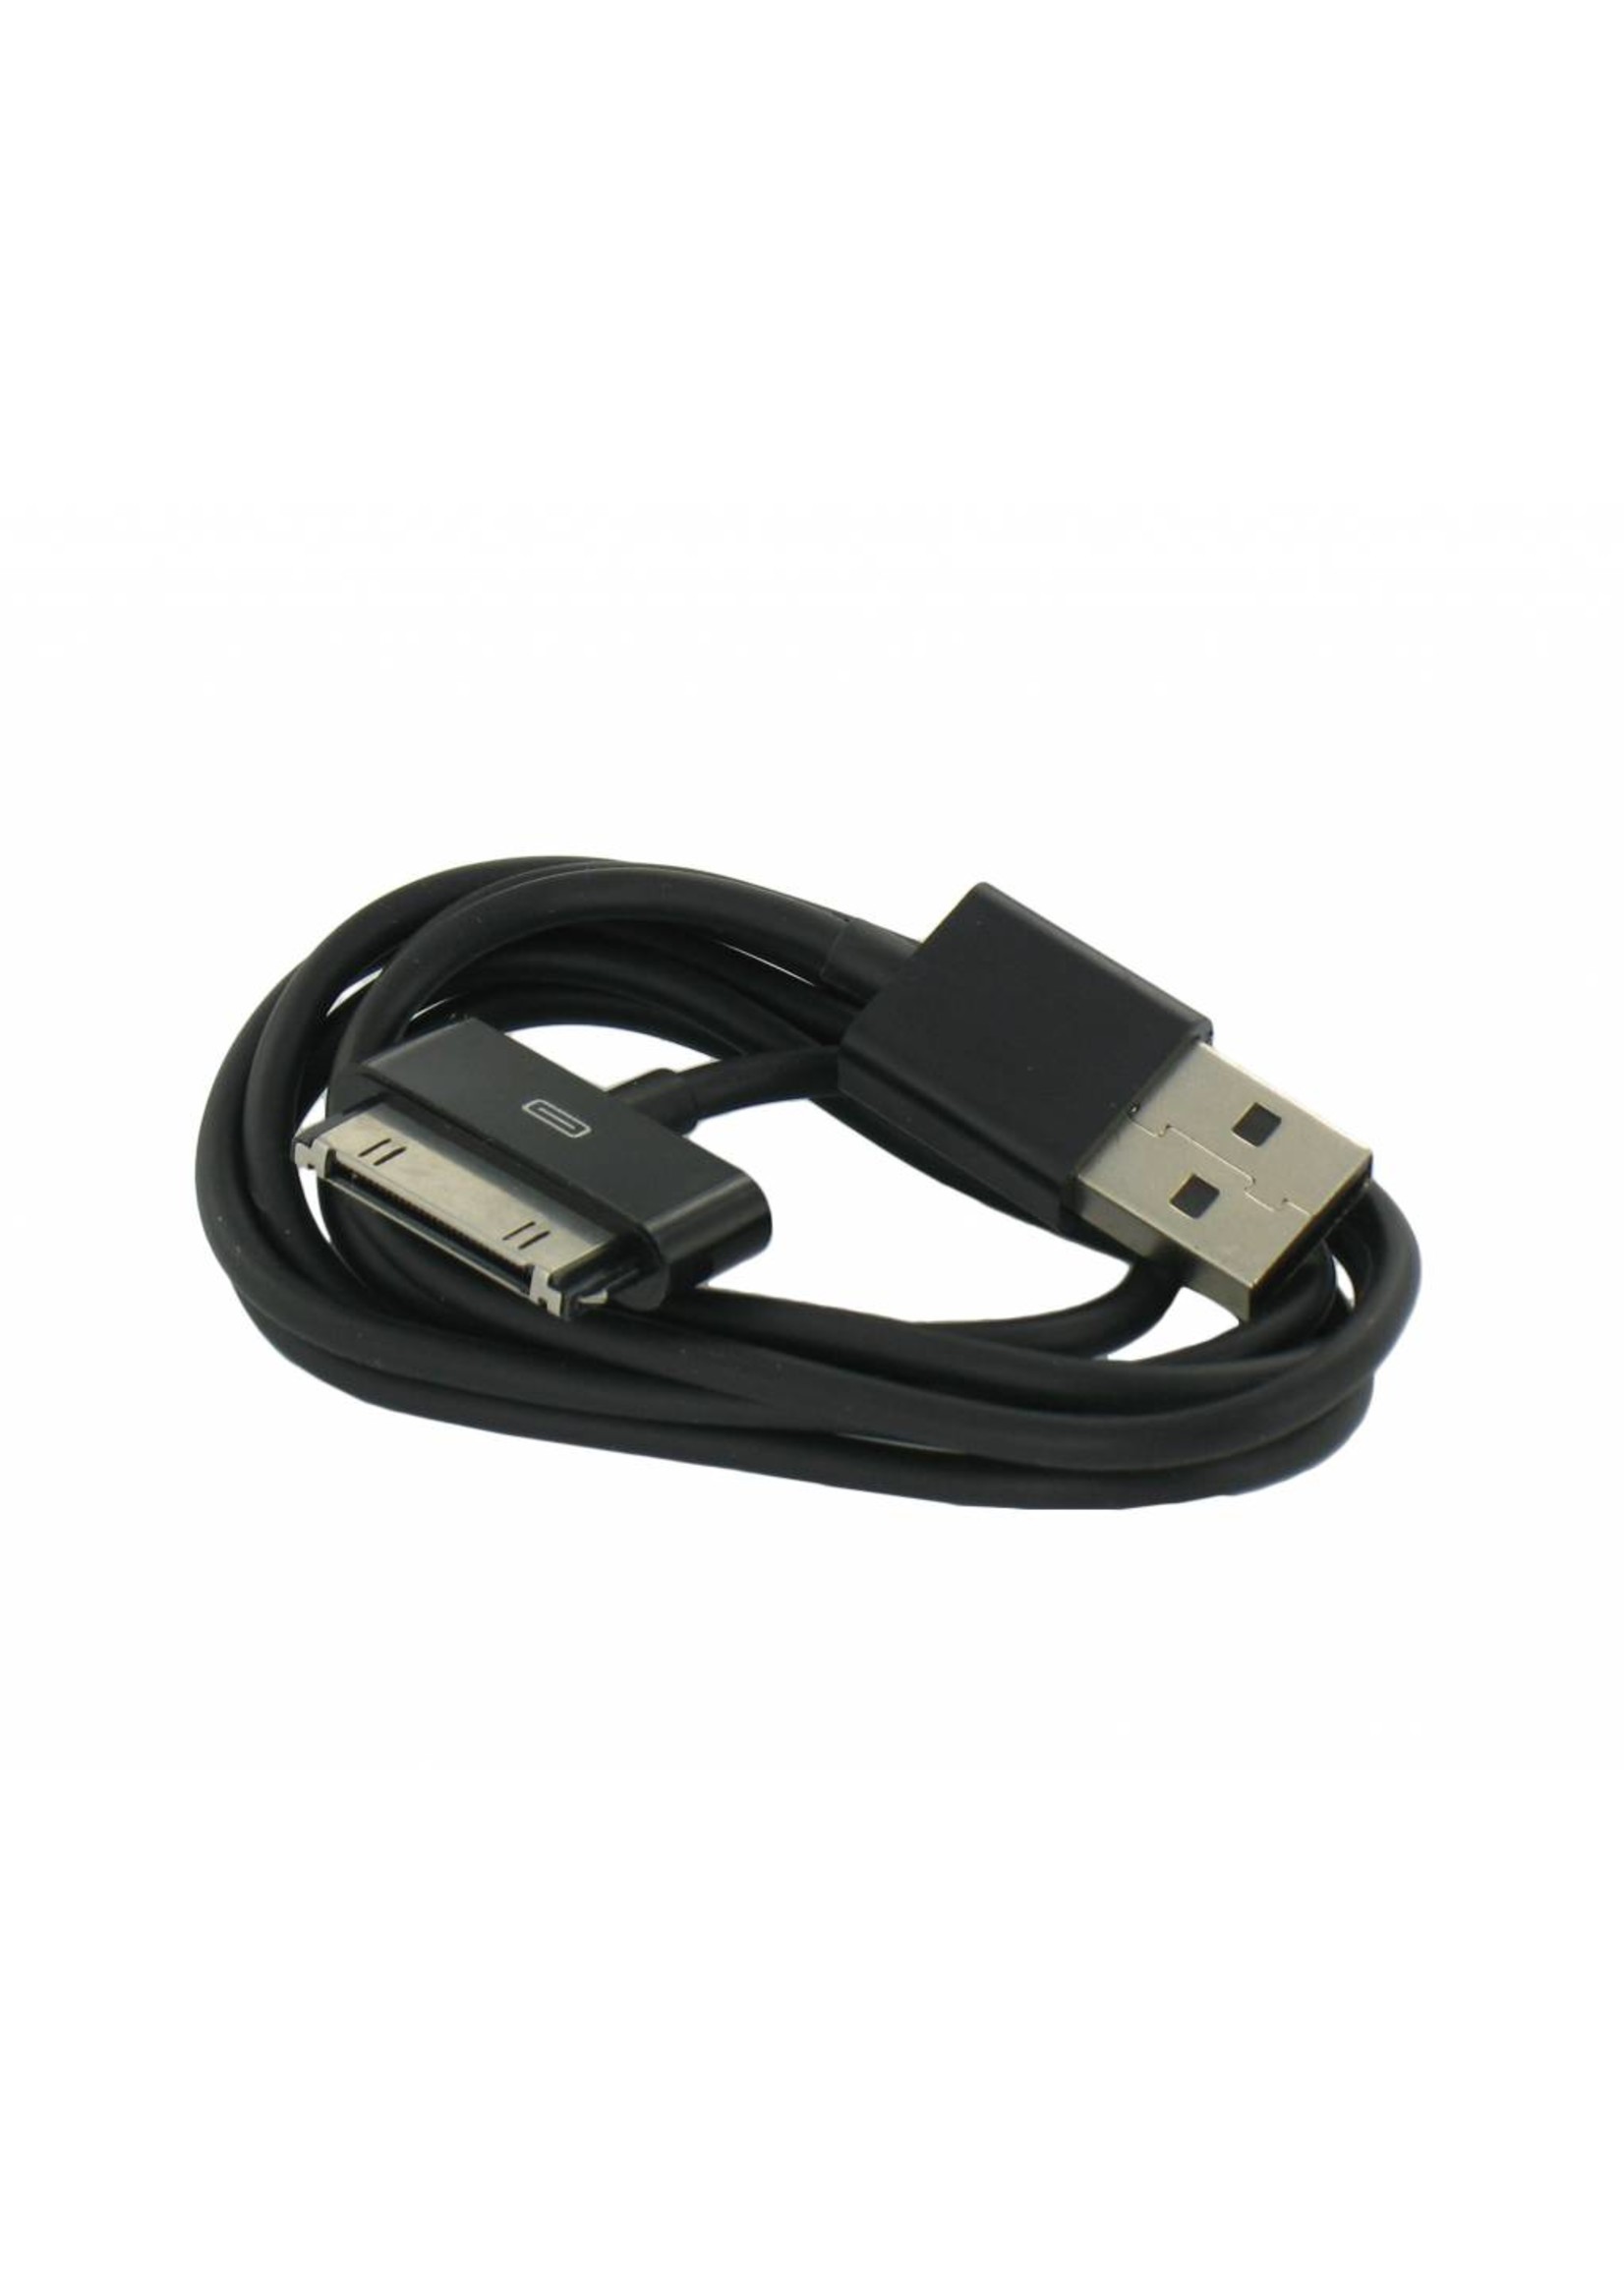 USB Data and Charging Cable for the iPhone 3 / 3GS / 4 / 4S Black